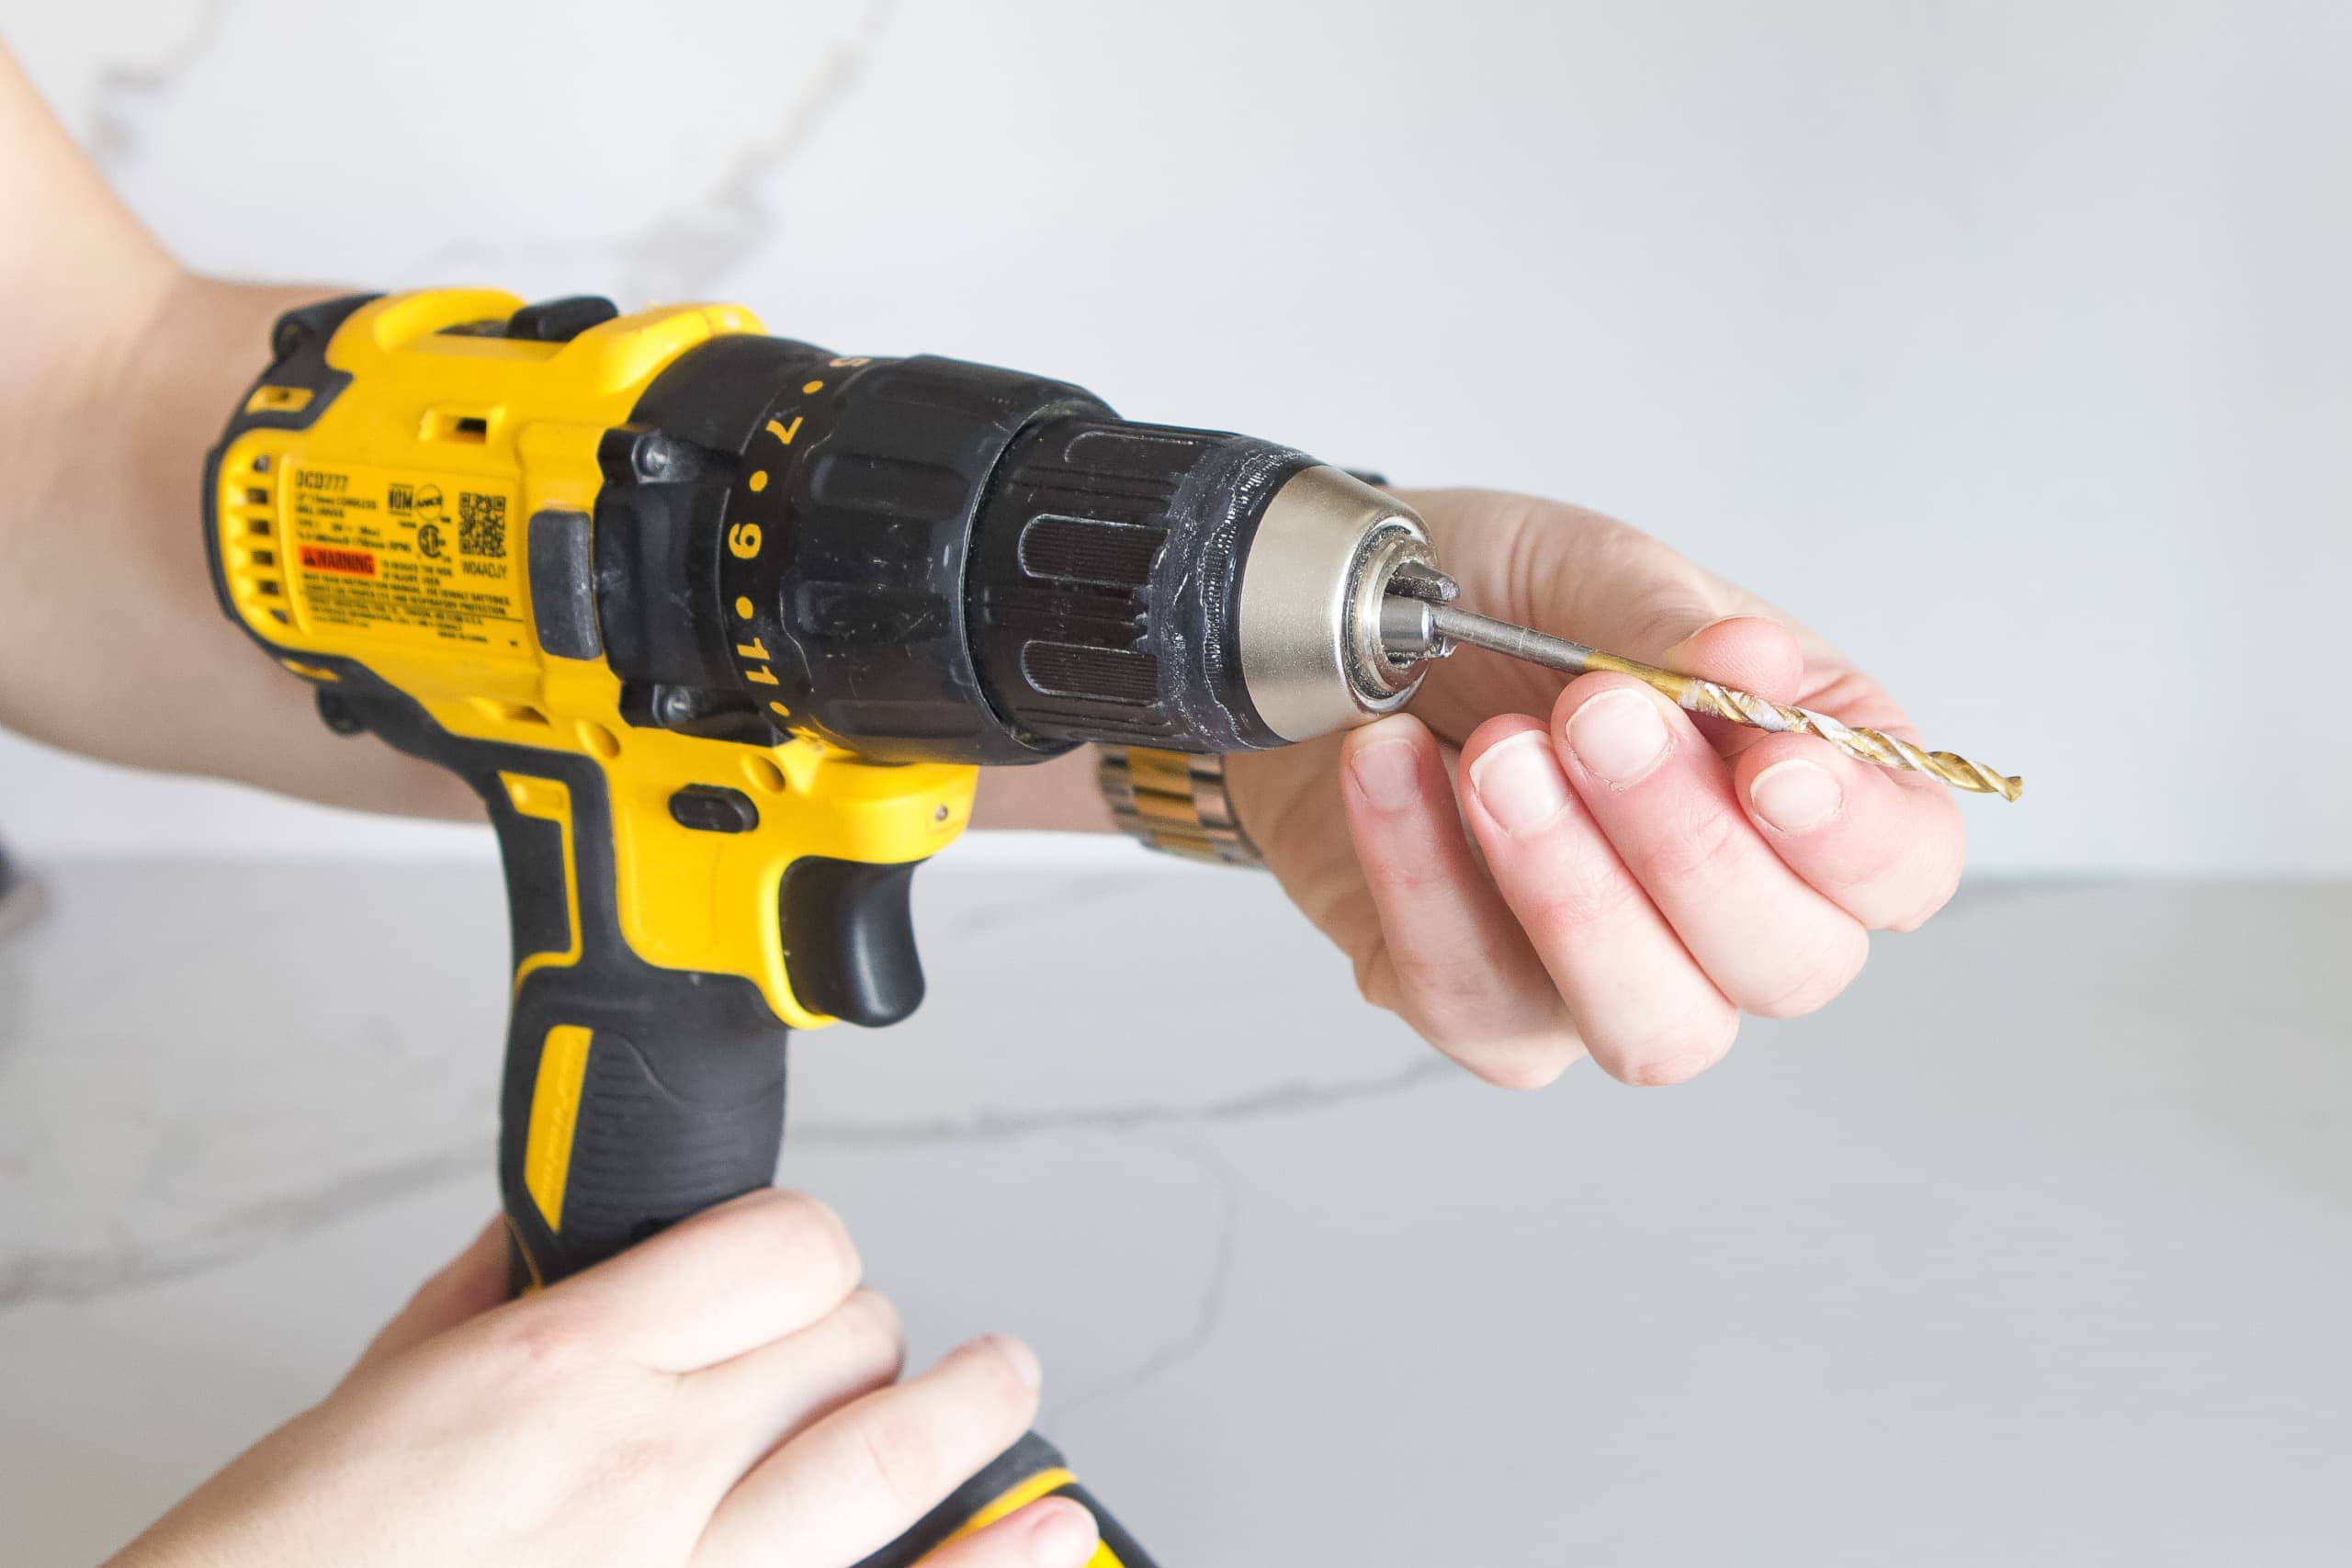 How to use a power drill